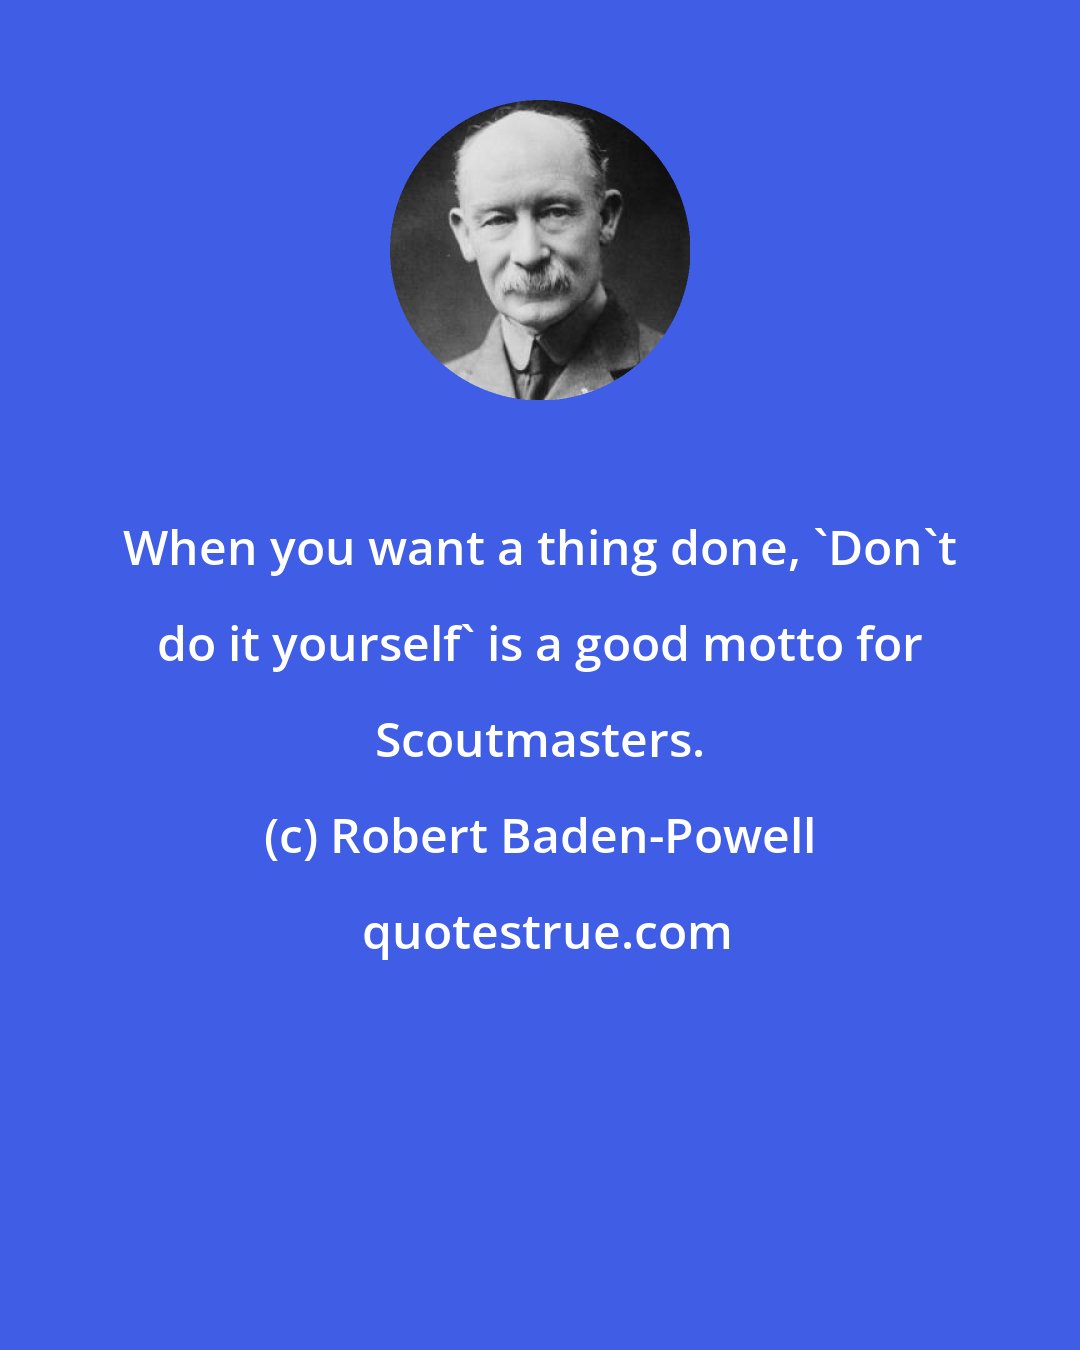 Robert Baden-Powell: When you want a thing done, 'Don't do it yourself' is a good motto for Scoutmasters.